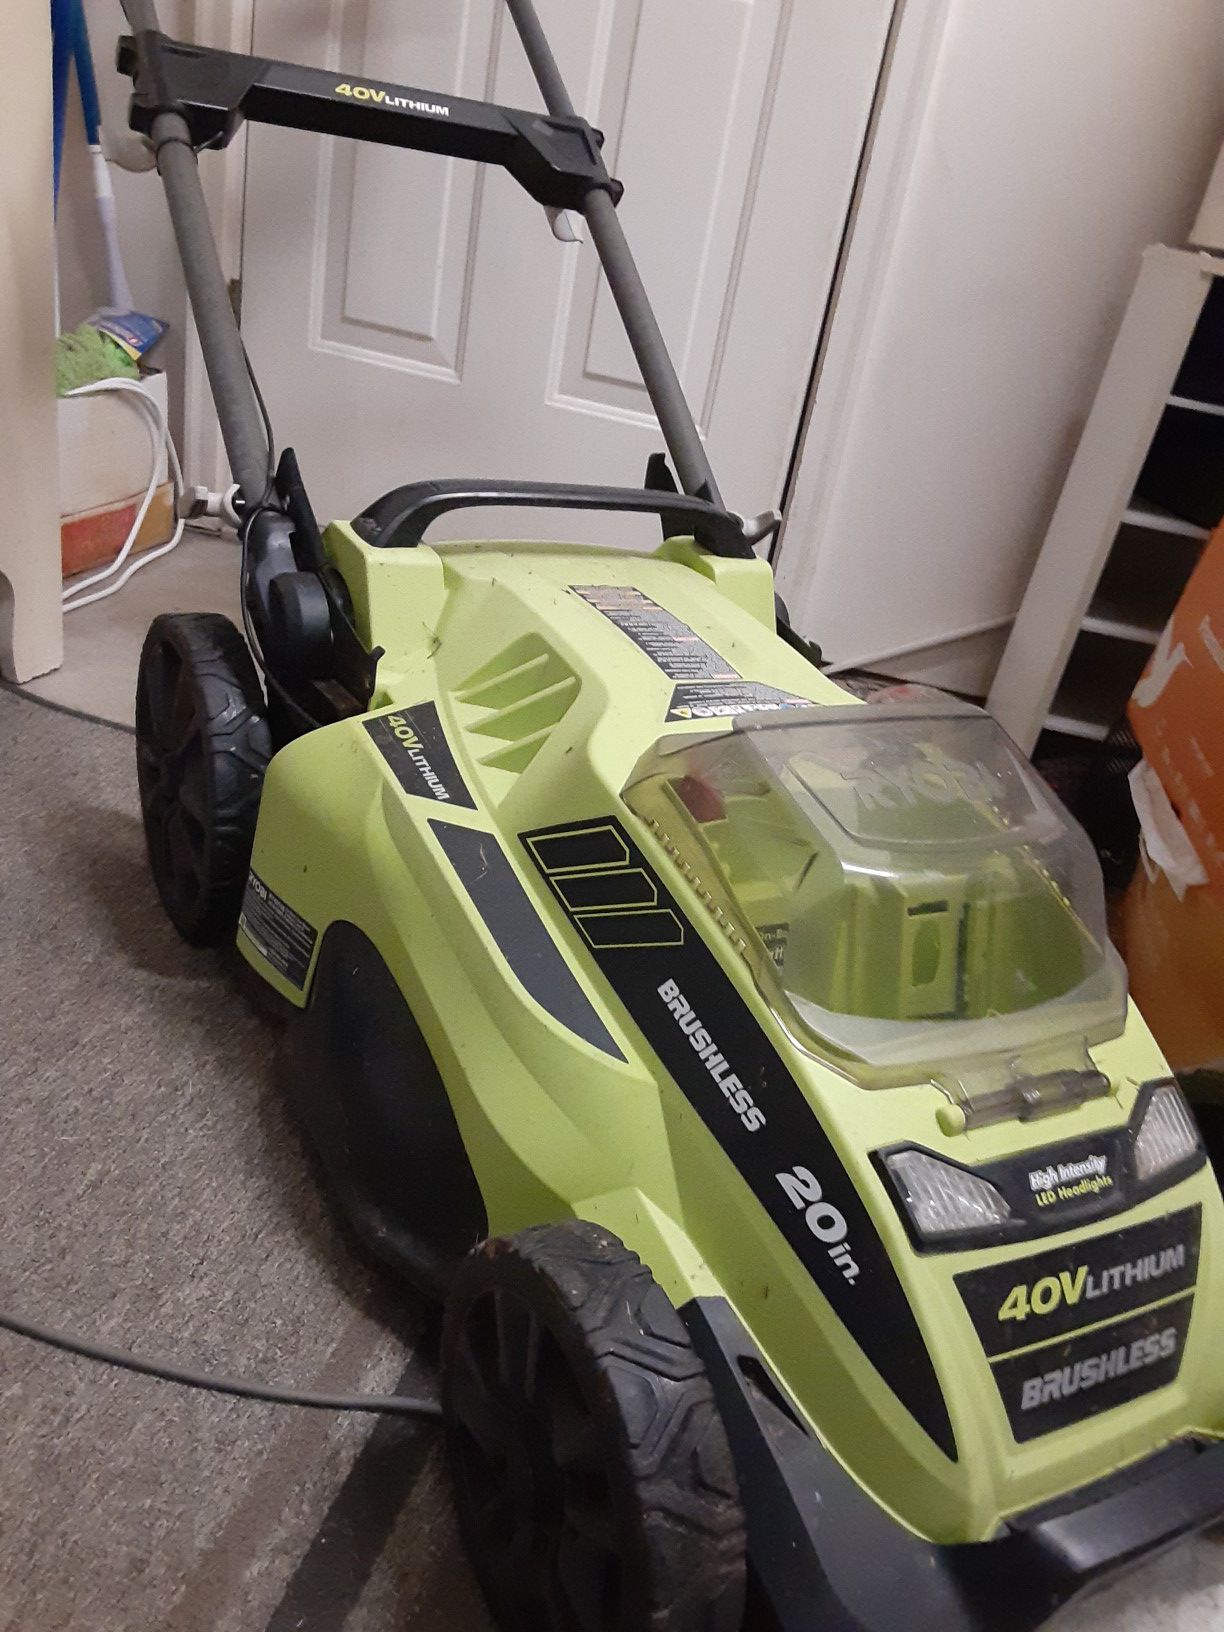 Ryobi 40v push mower with charger 20 inch cutting width.